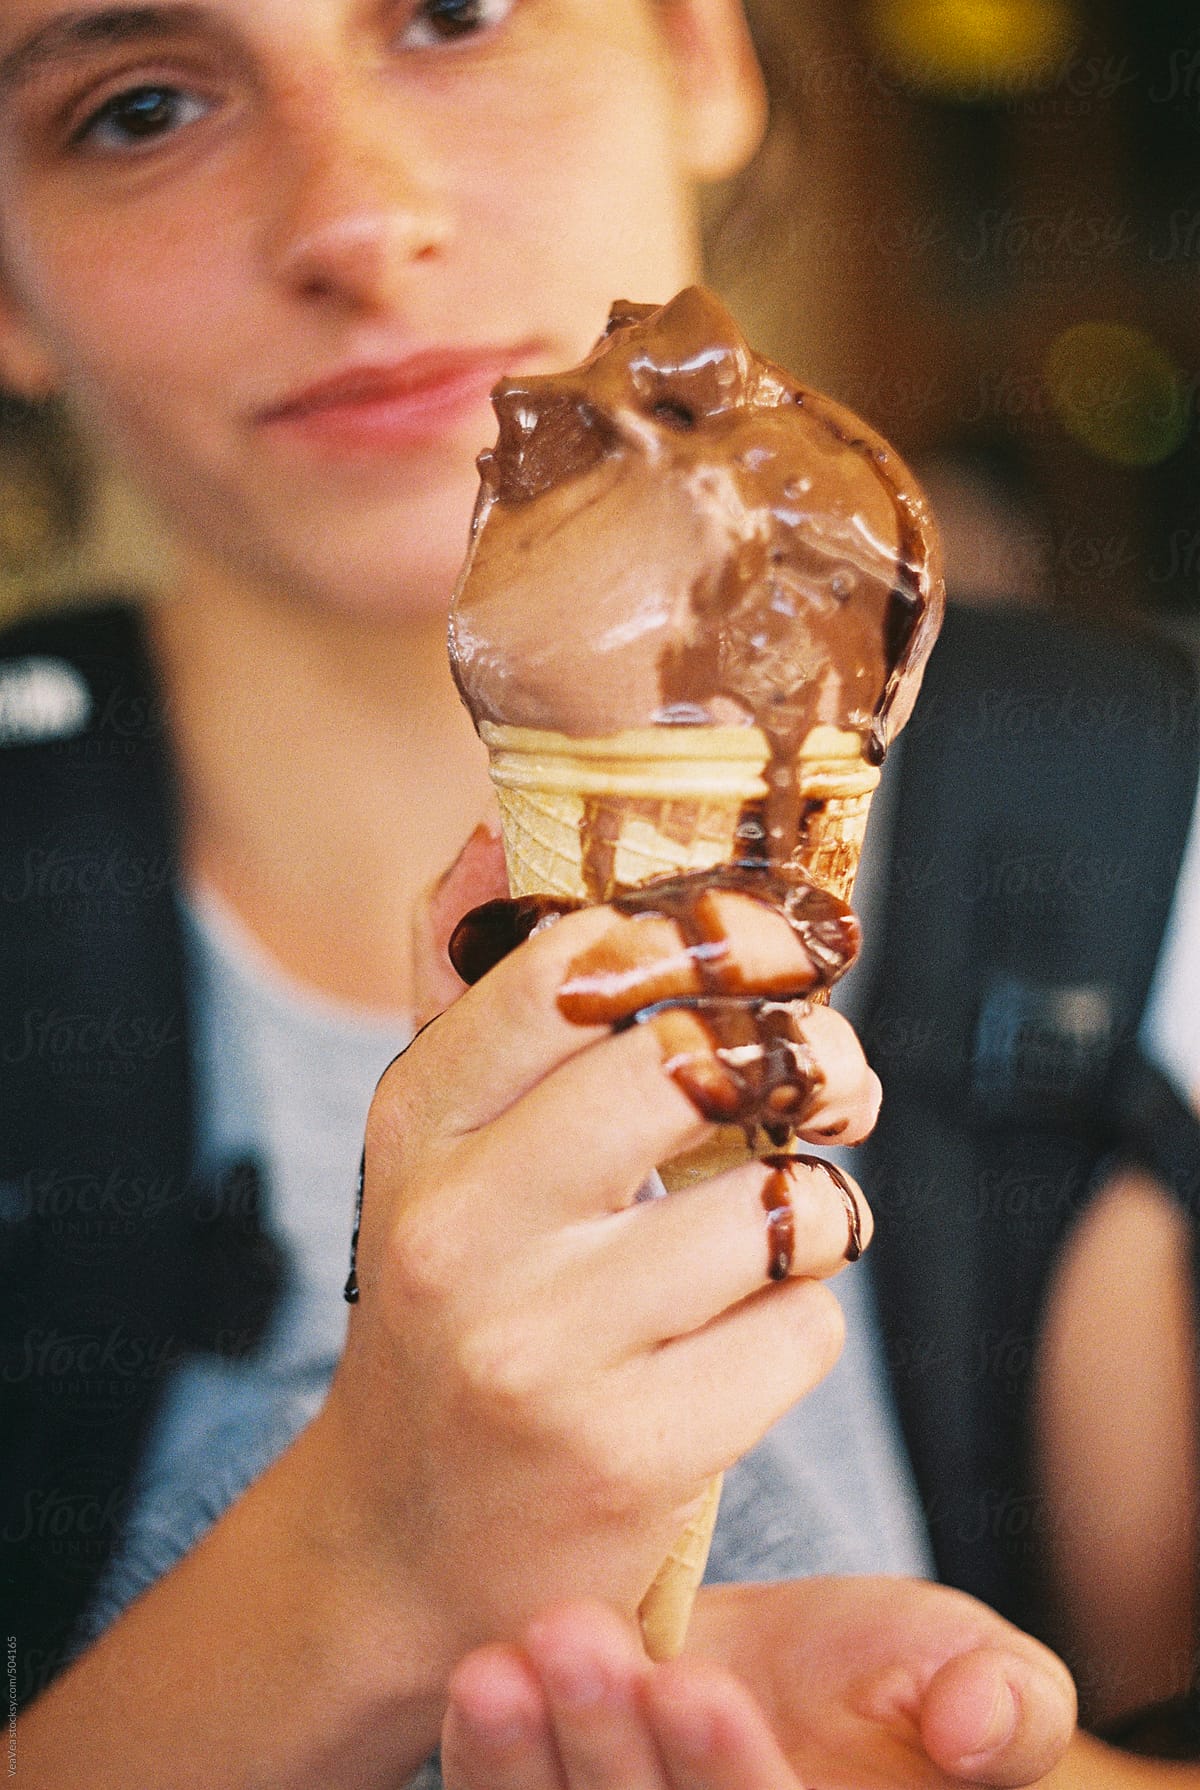 Girl with the chocolate ice cream during summer day